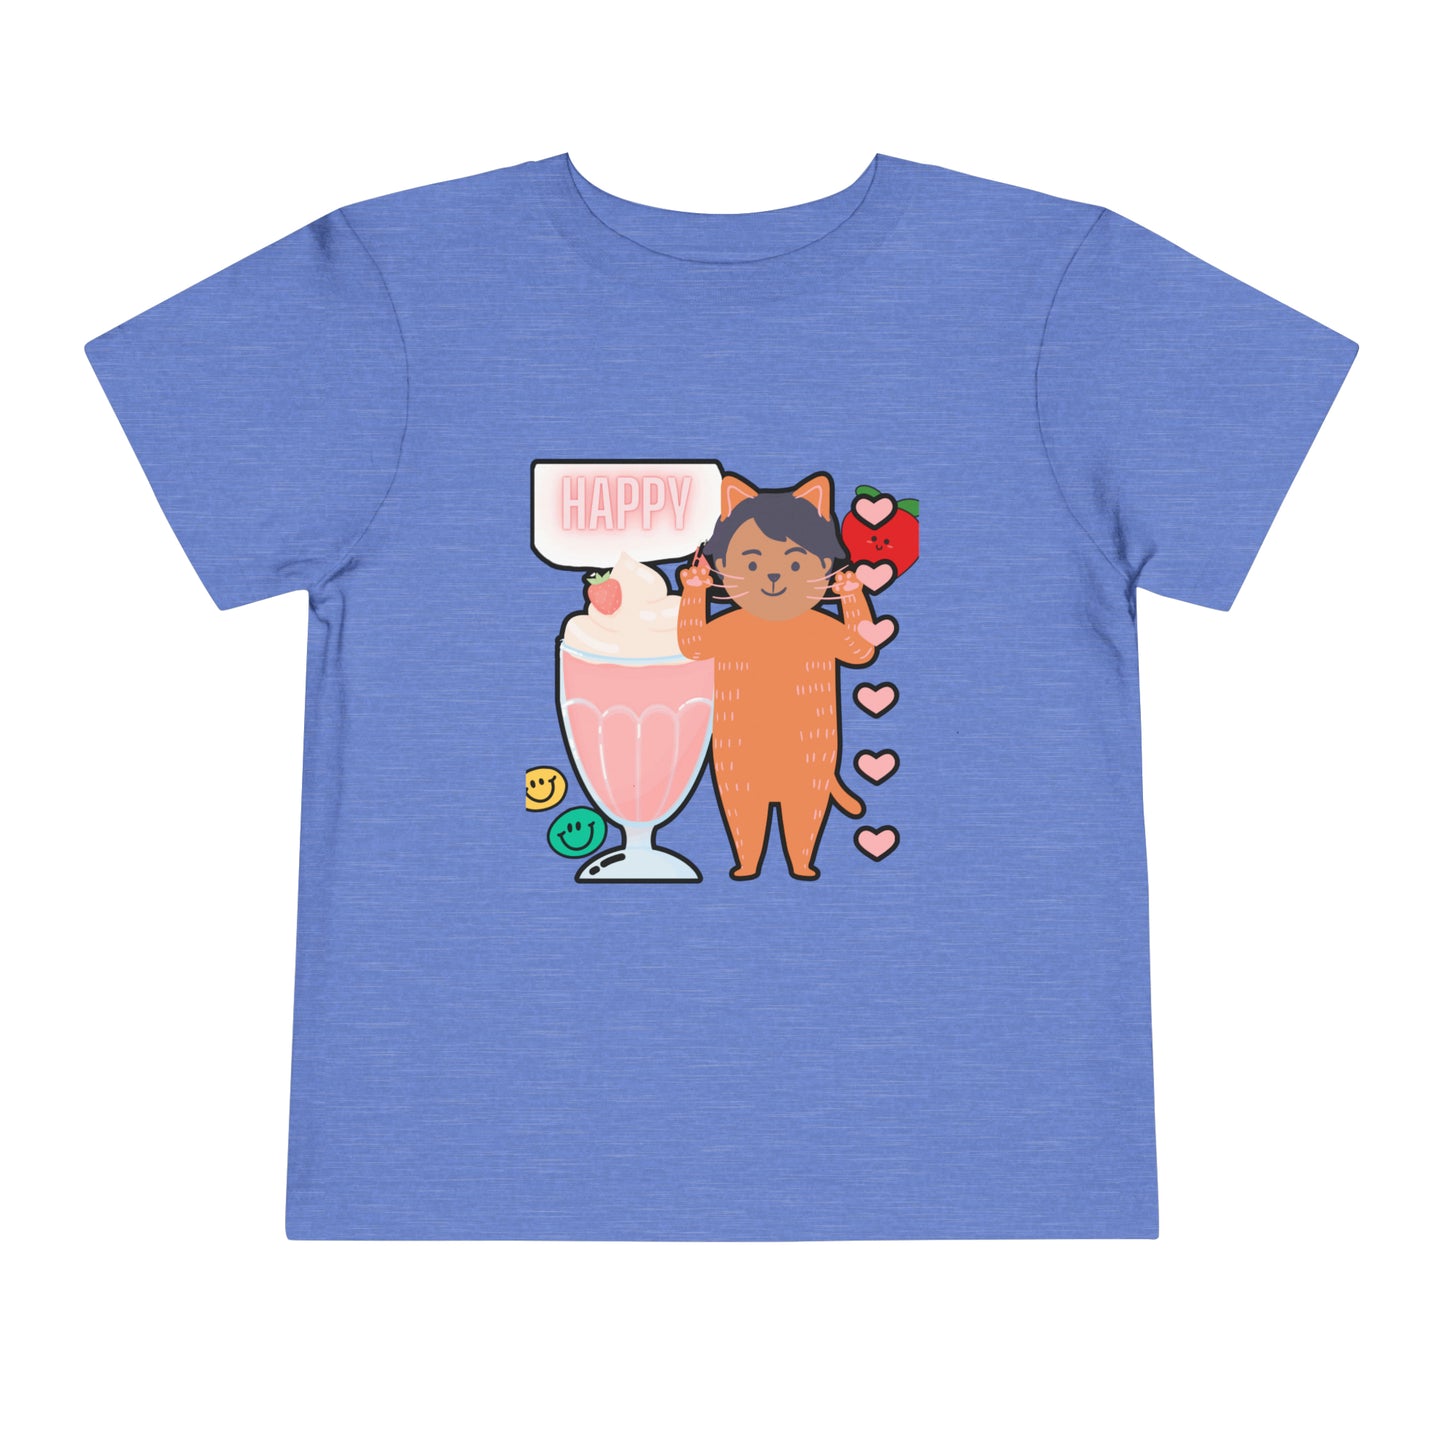 Adorable Toddler T-Shirt: Love is Purrrfect with Cute Cat and Milkshake Design